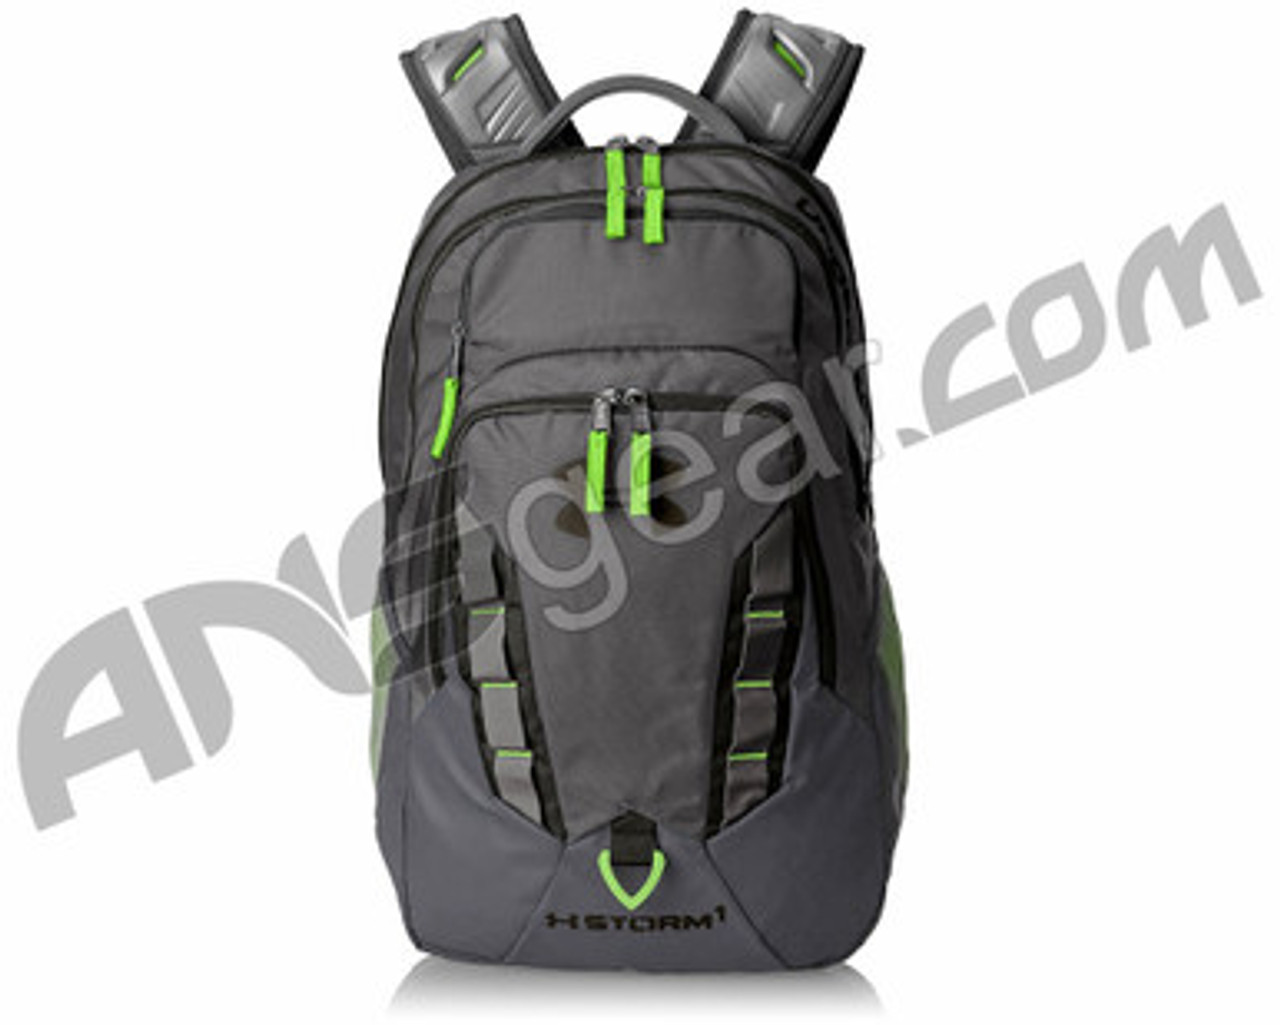 Under Armour Backpack Recruit green